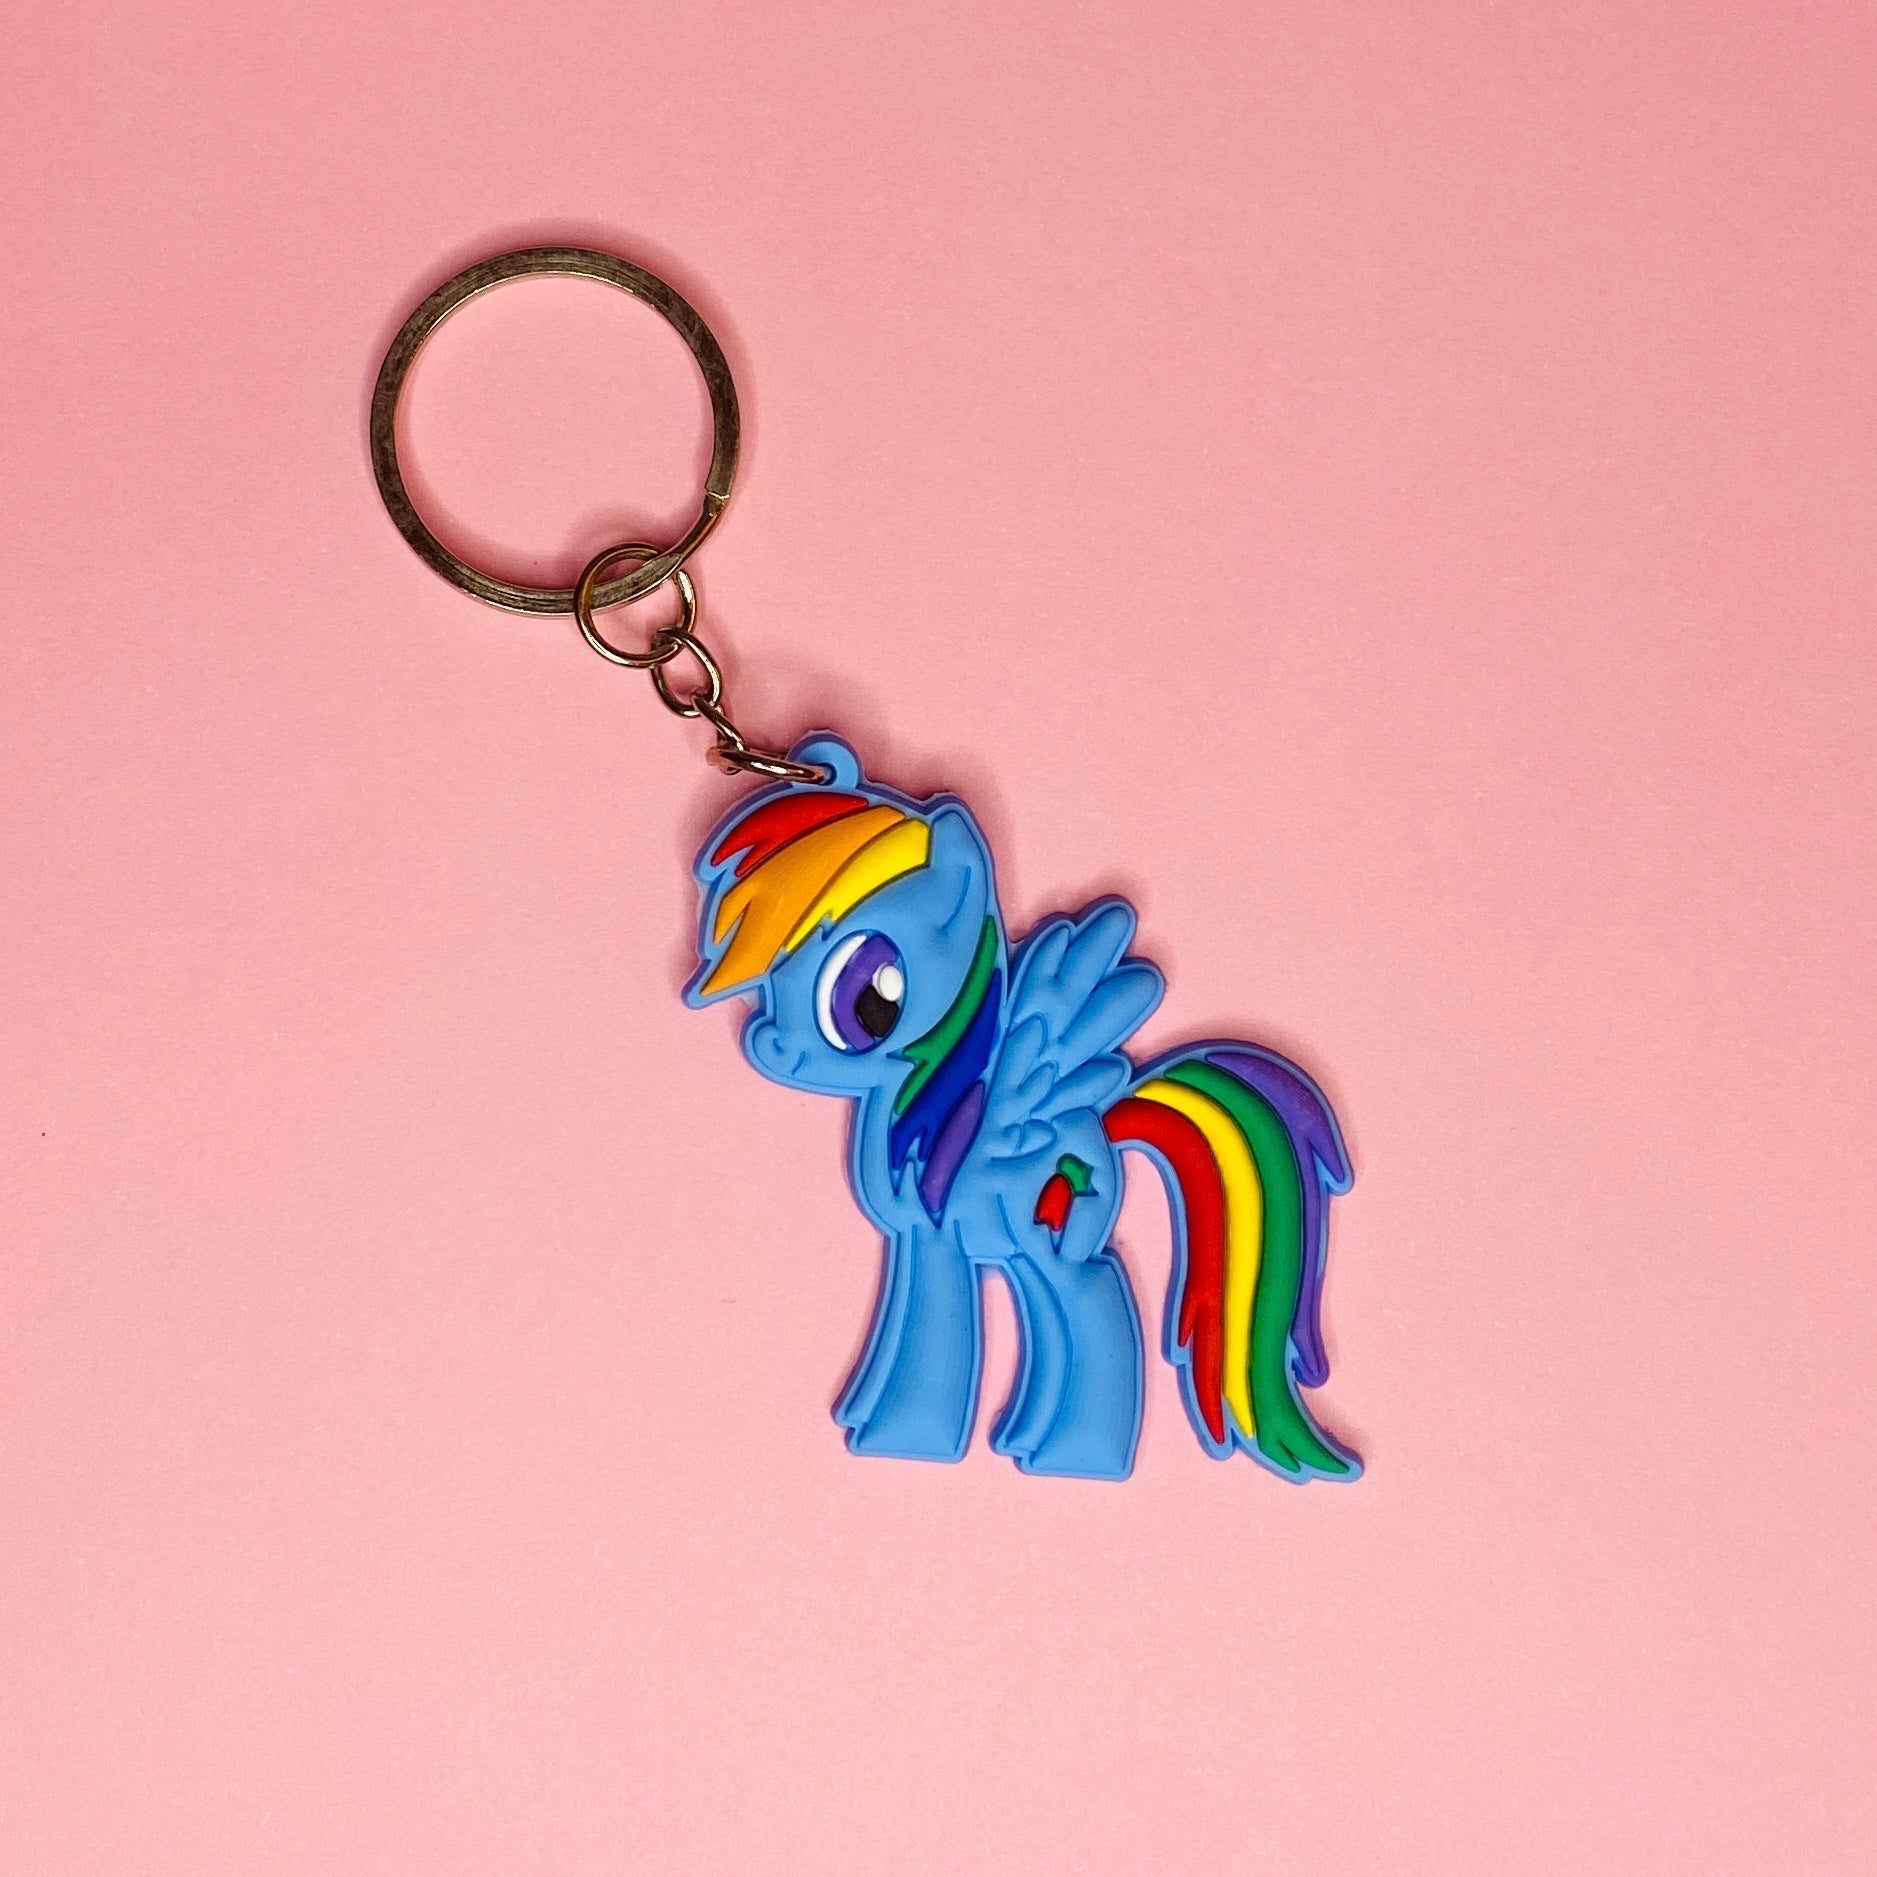 My Little Pony Rubber Keychain Charm Keychains Pink Sweetheart